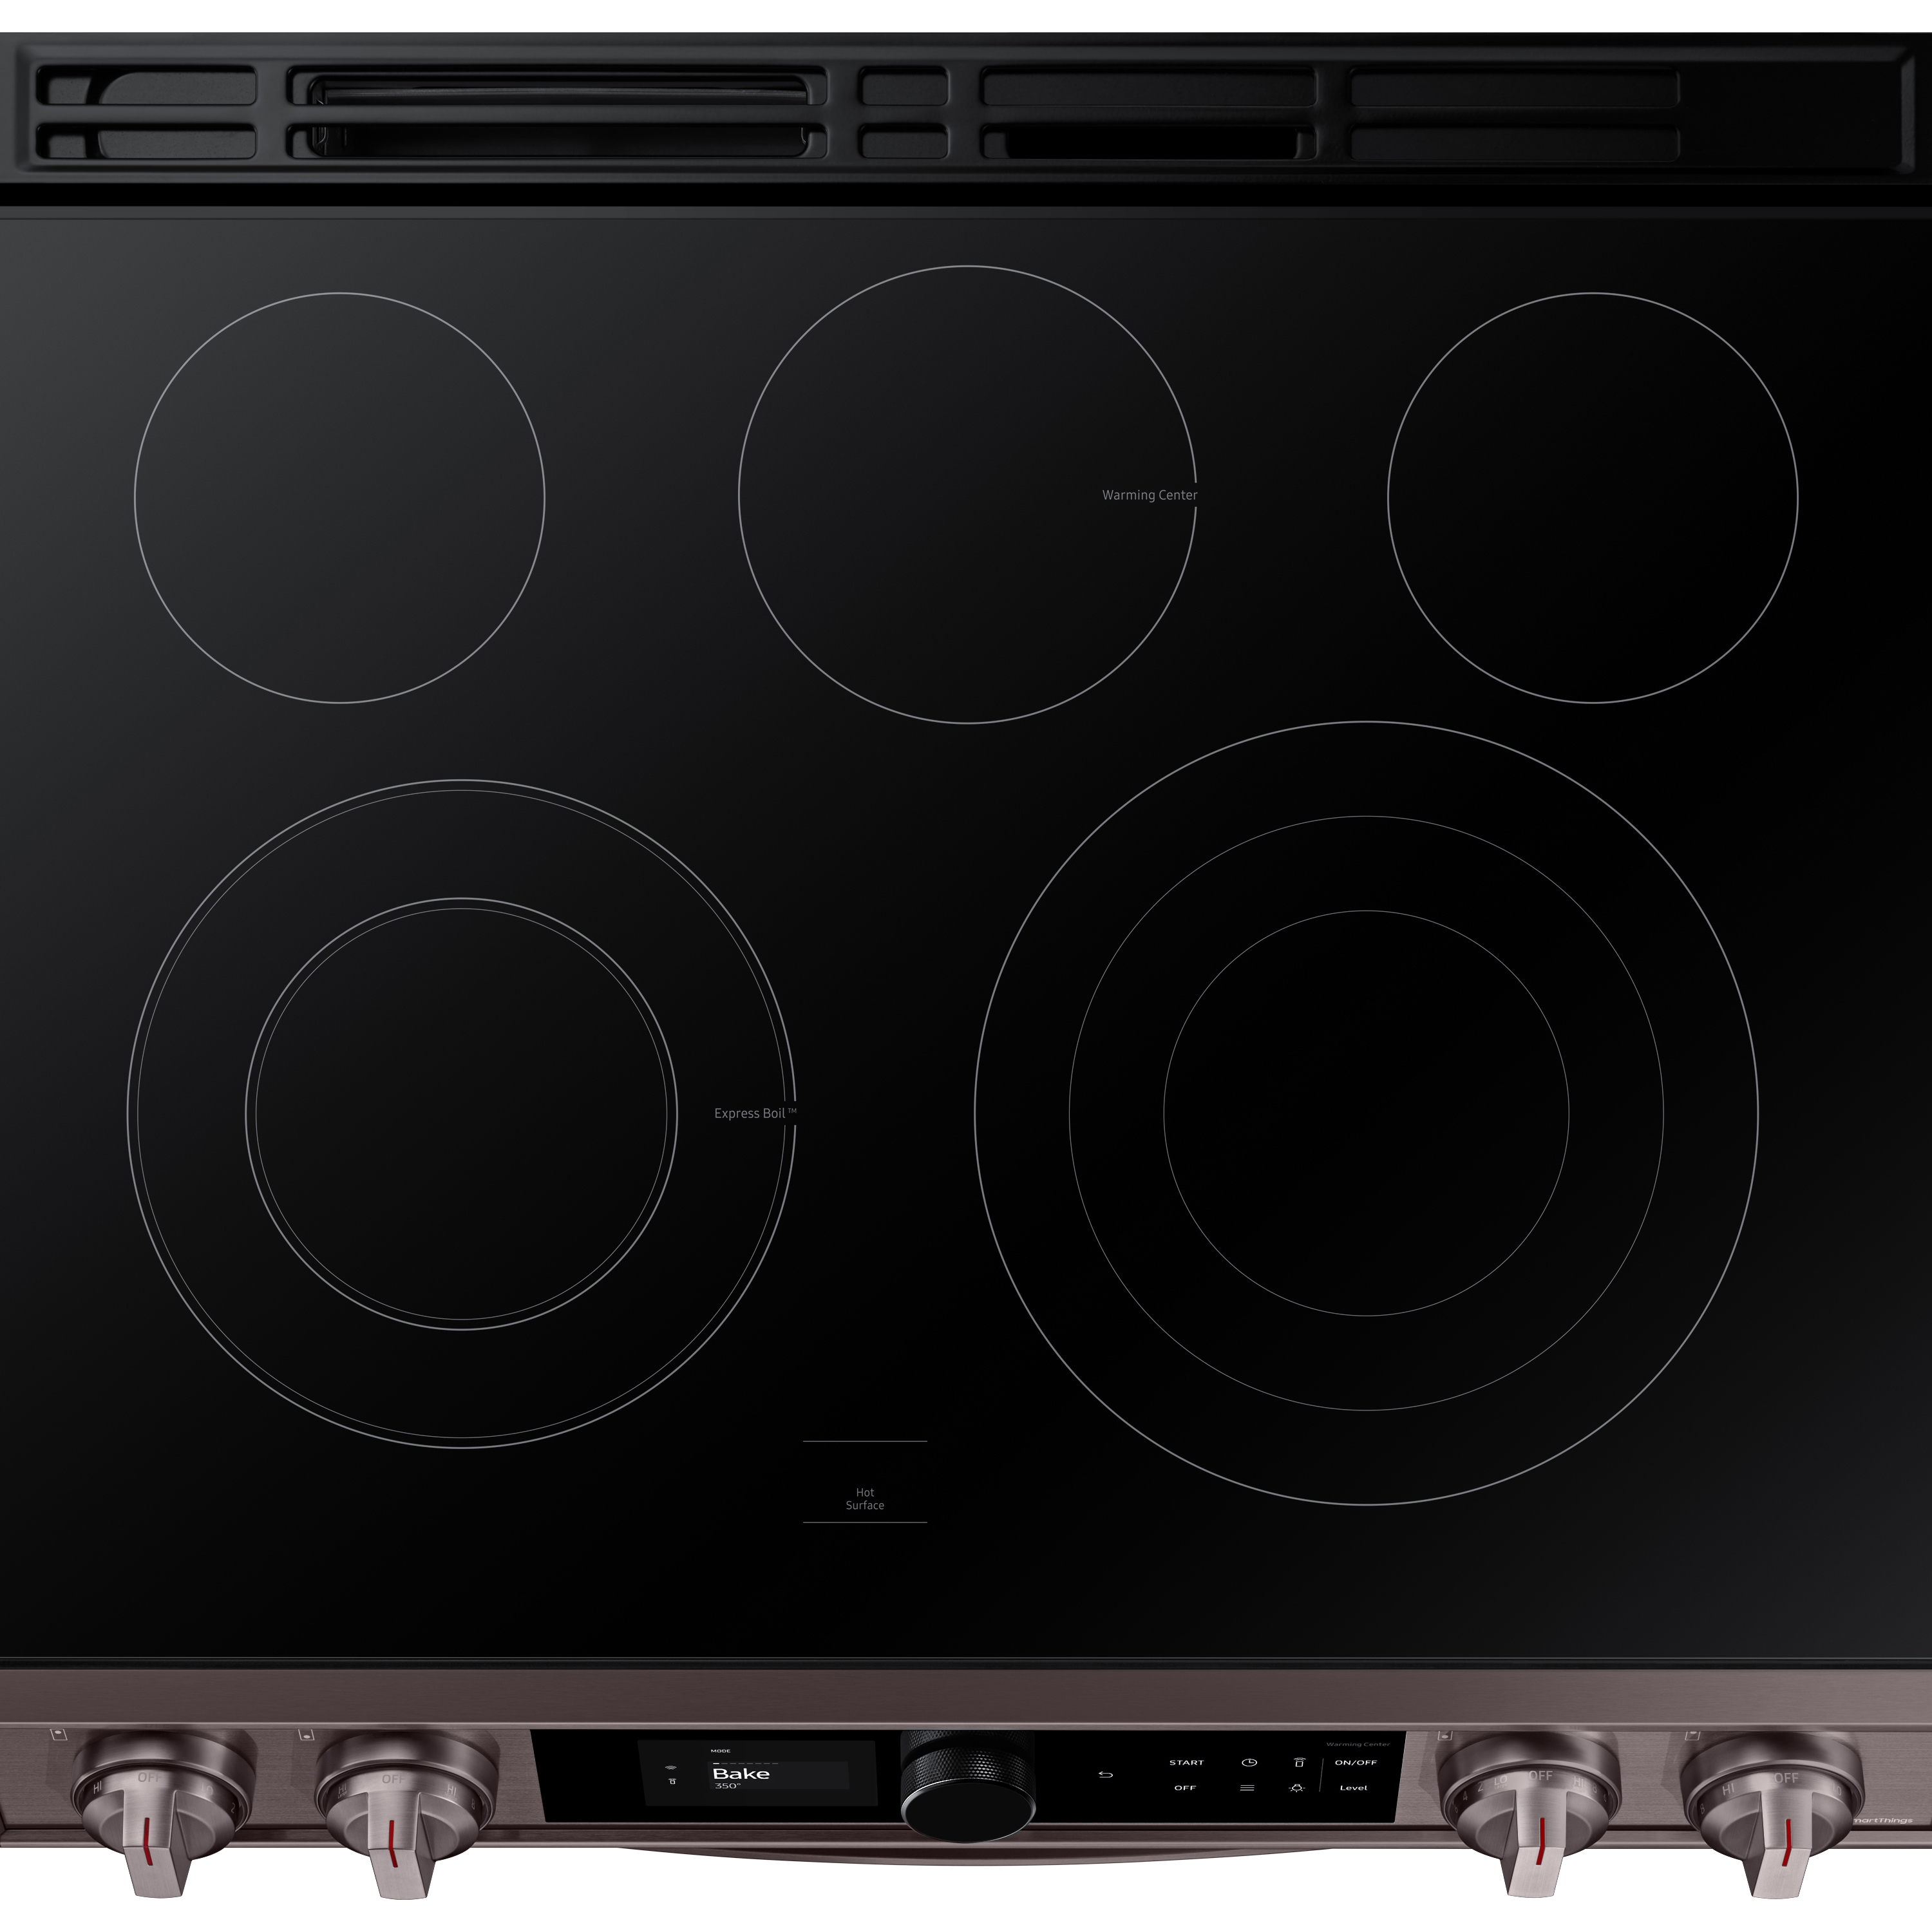 Thumbnail image of Bespoke Smart Slide-in Electric Range 6.3 cu. ft. with Smart Dial &amp; Air Fry in Tuscan Steel